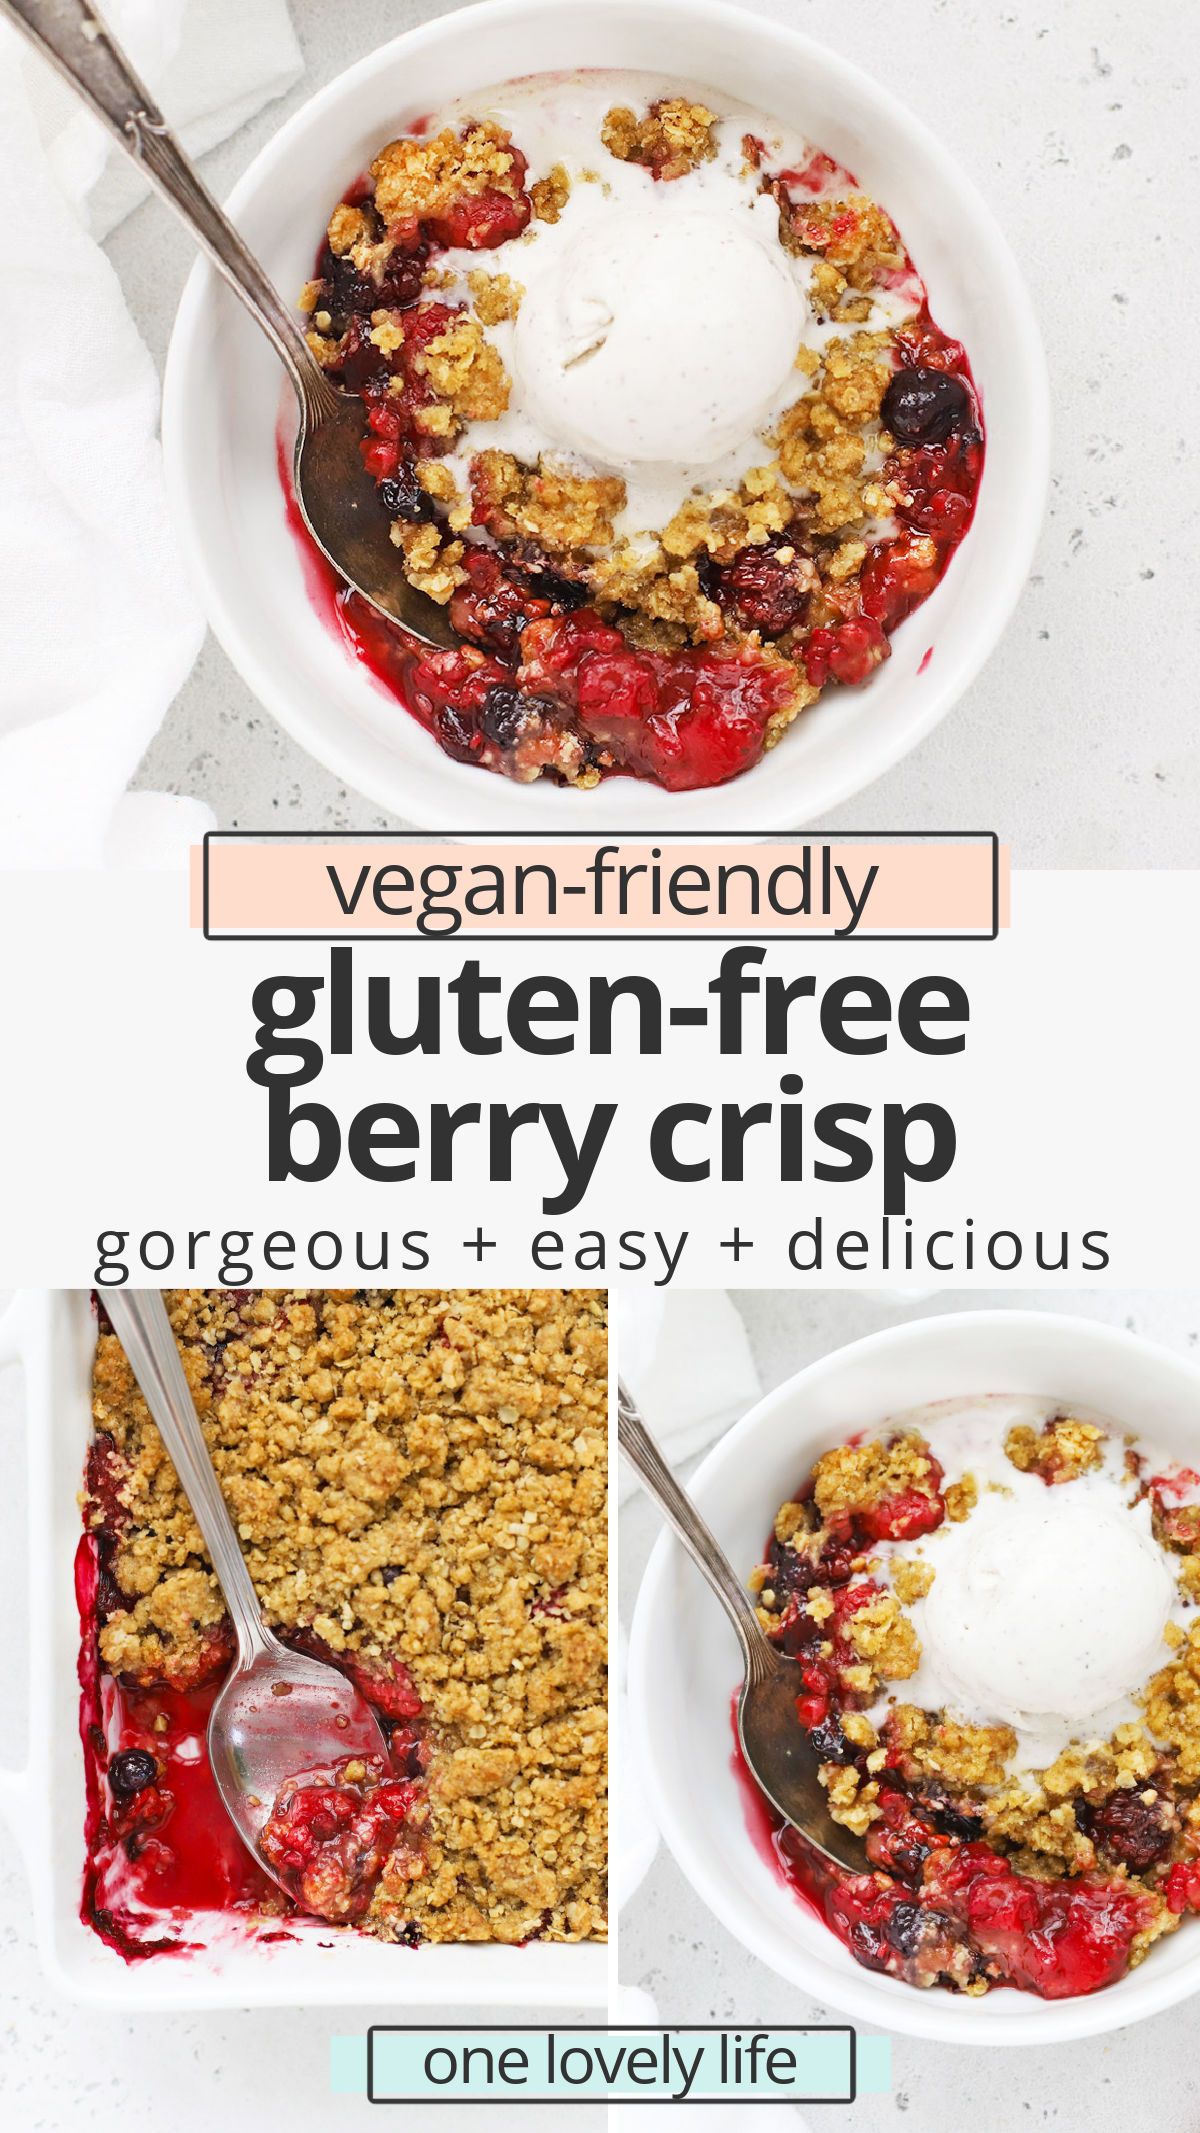 Gluten-Free Berry Crisp - Colorful berries topped with a buttery crumble topping. You'll love this mixed berry crisp with a scoop of ice cream on top! (Gluten-Free, Vegan-Friendly) // triple berry crisp // mixed berry crisp recipe // vegan berry crisp // summer dessert // spring dessert // 4th of July dessert #glutenfree #berrycrisp #dessert